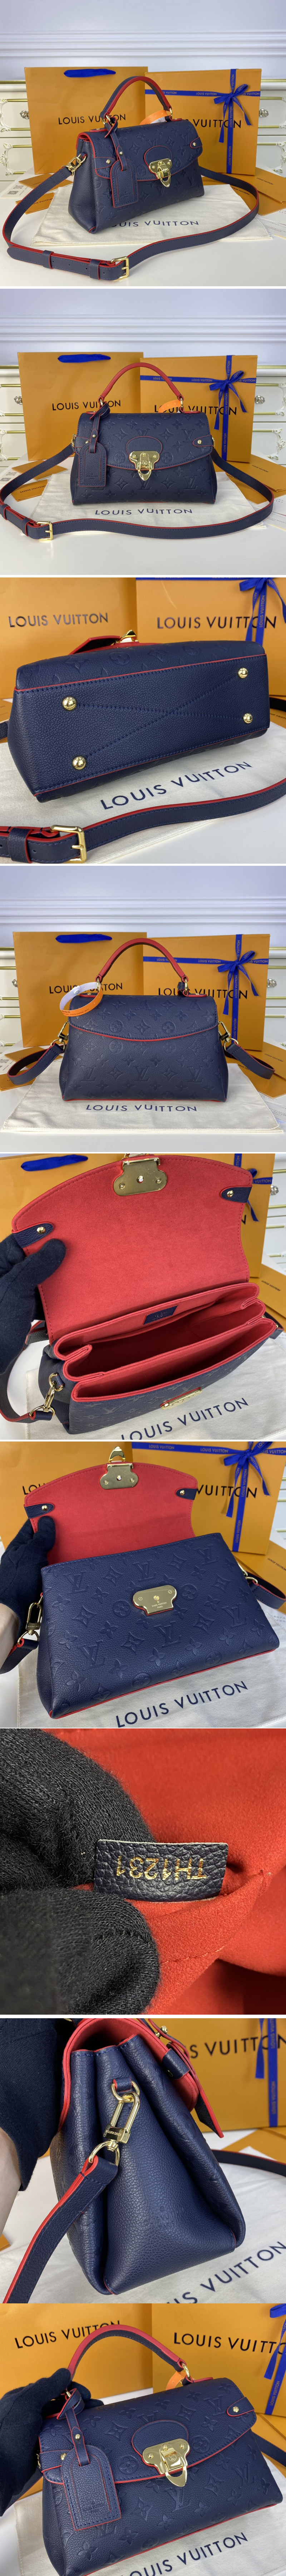 Louis Vuitton M53941 LV Georges BB bag in Navy Blue embossed